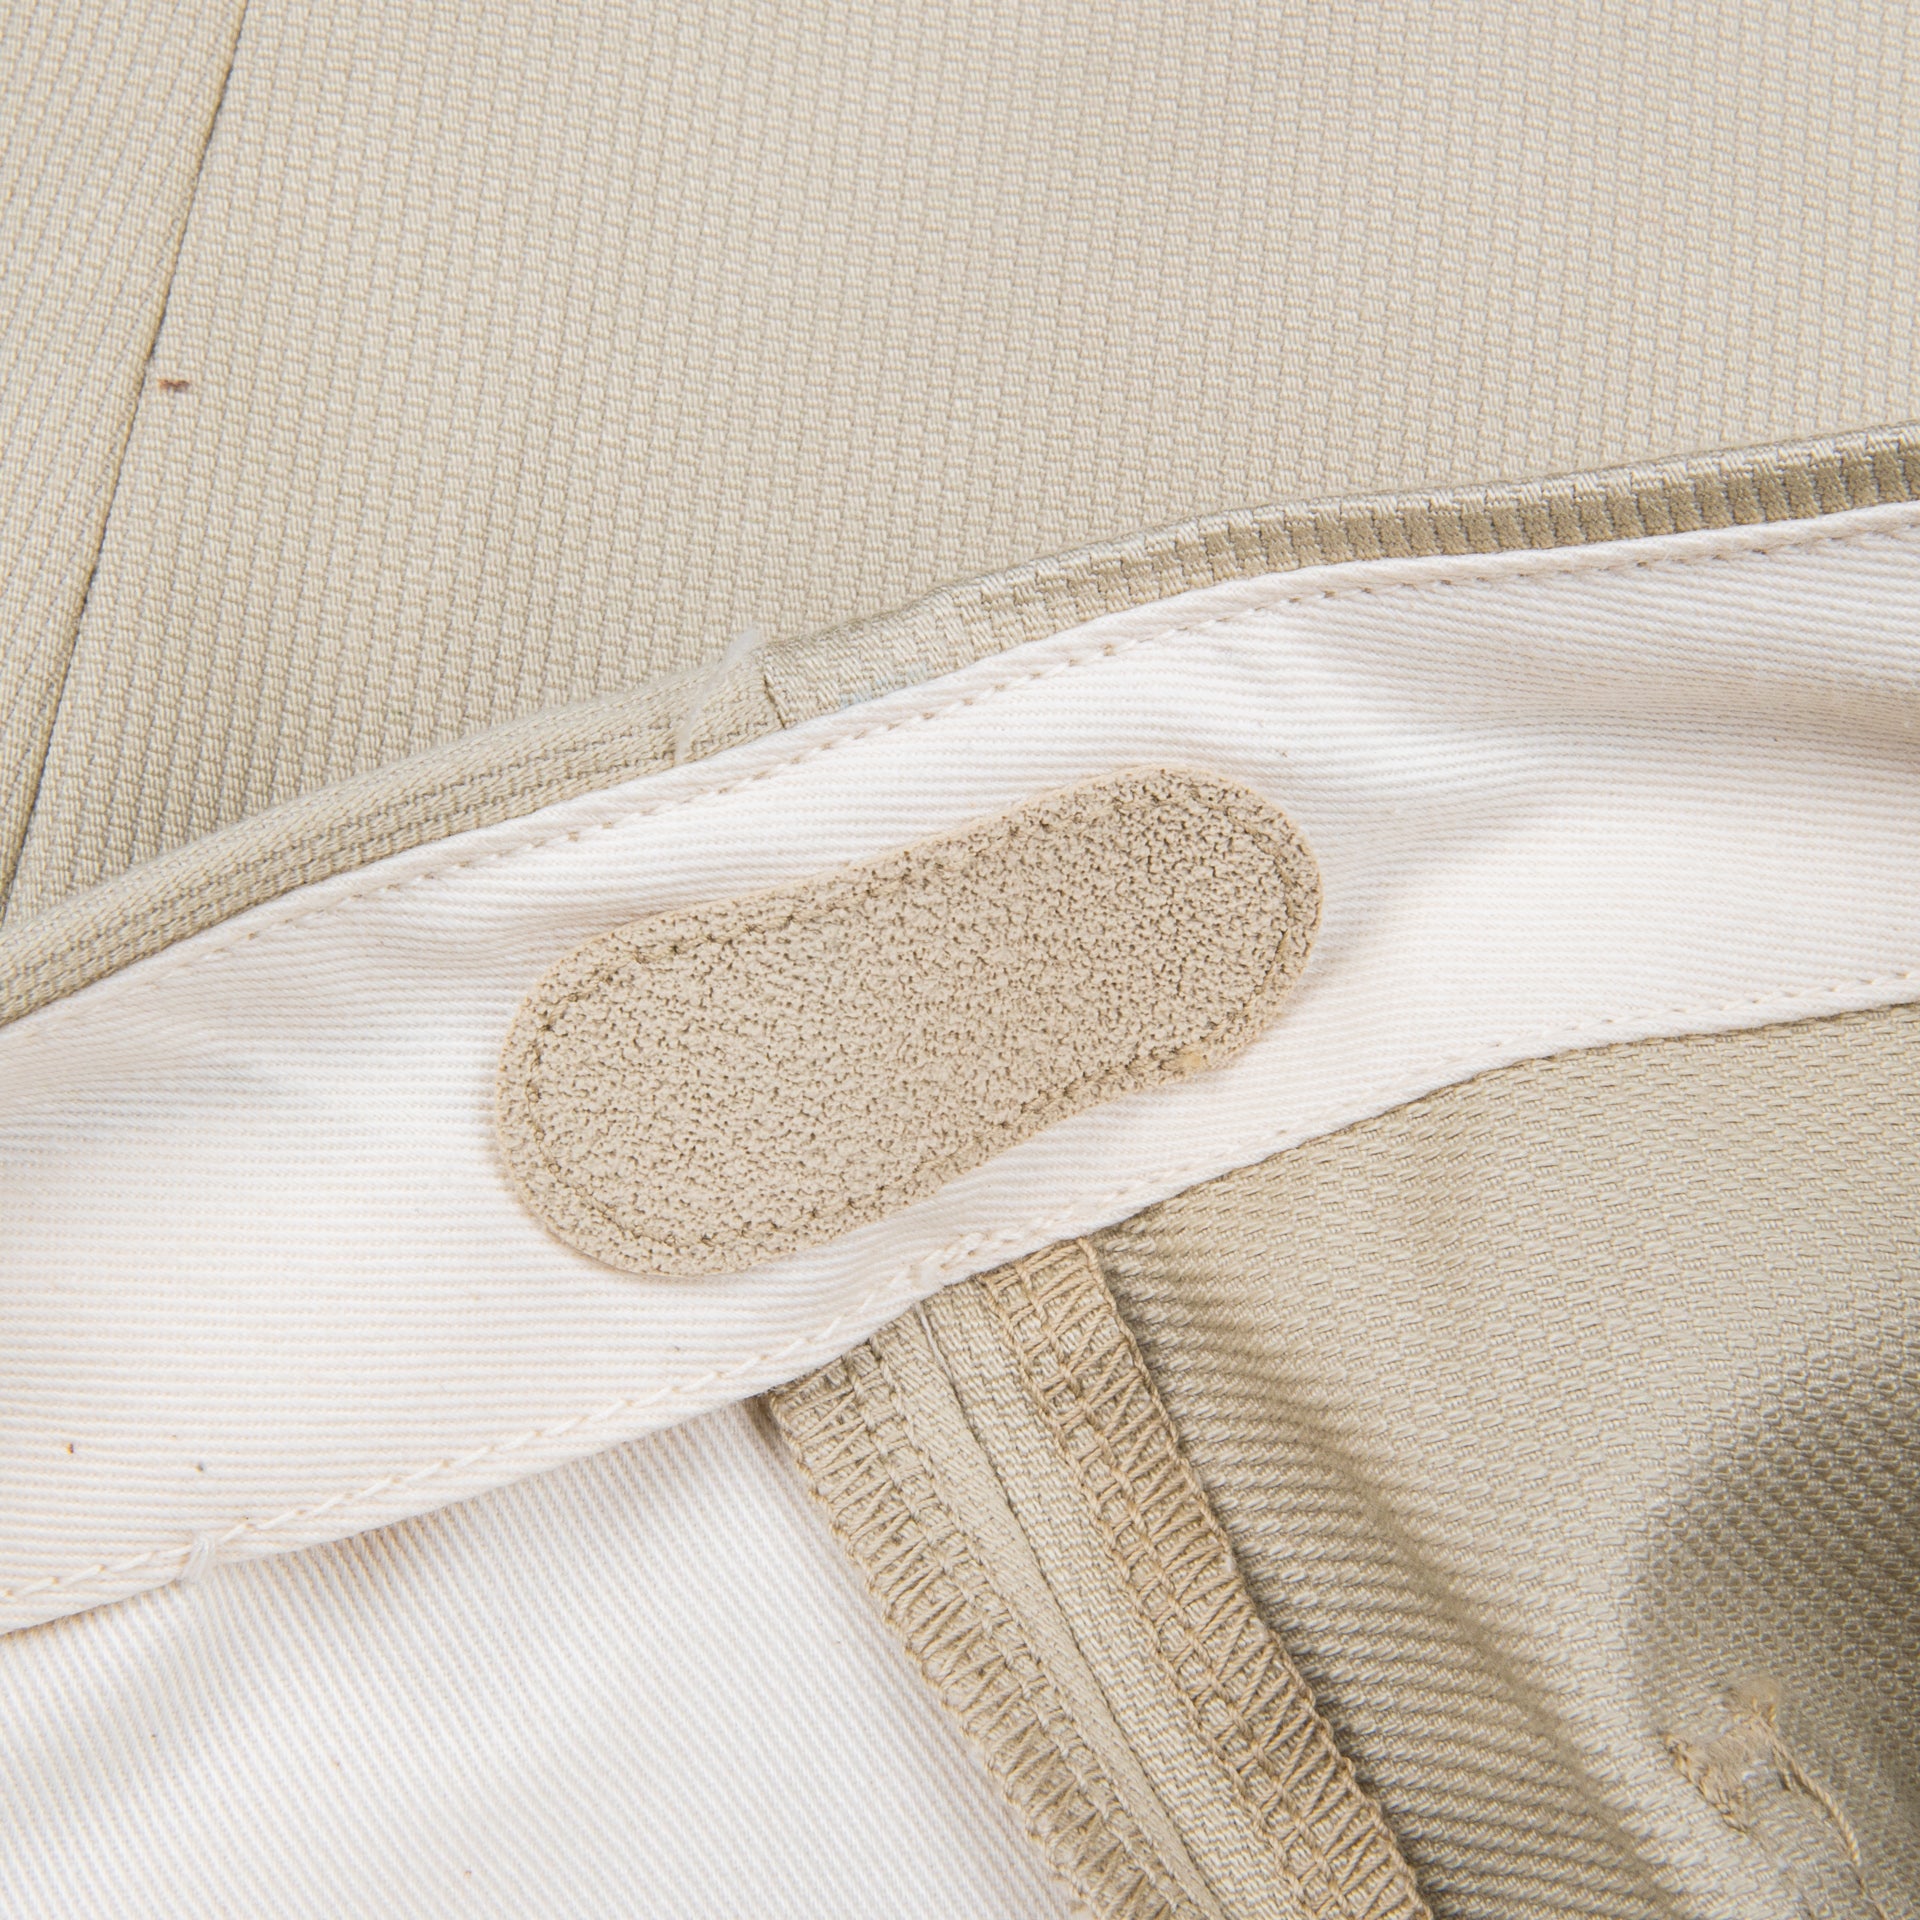 The Real McCoy's Belted Waistband Plain Stitch Pique Pants Ivory ...